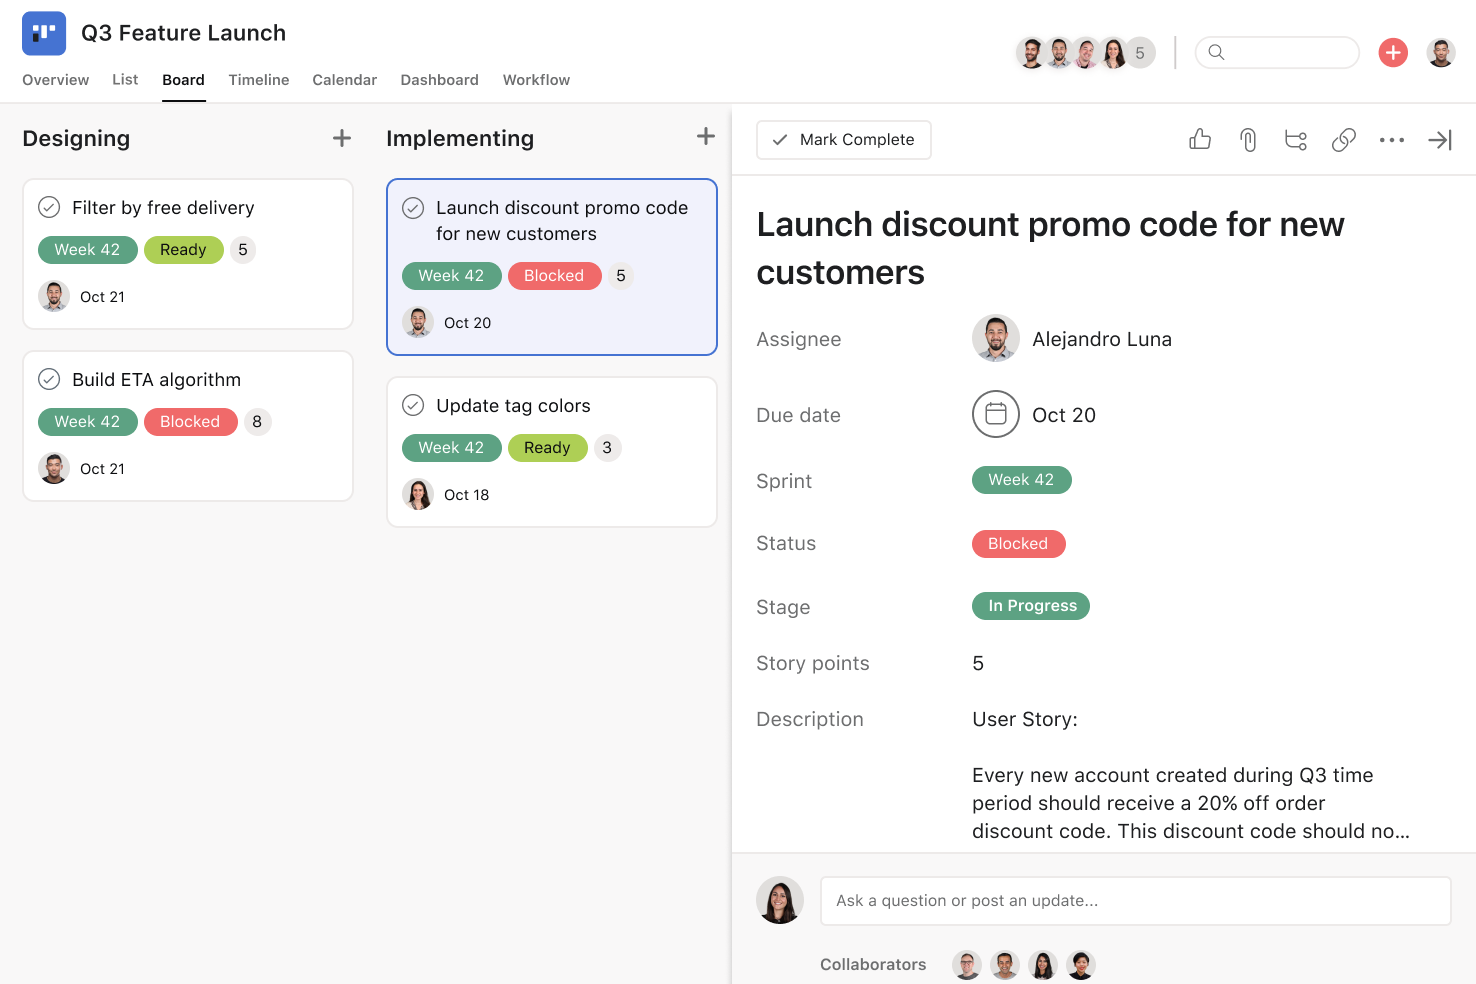 [Product ui] Kanban card task in an Asana project, Kanban board style view (Boards)